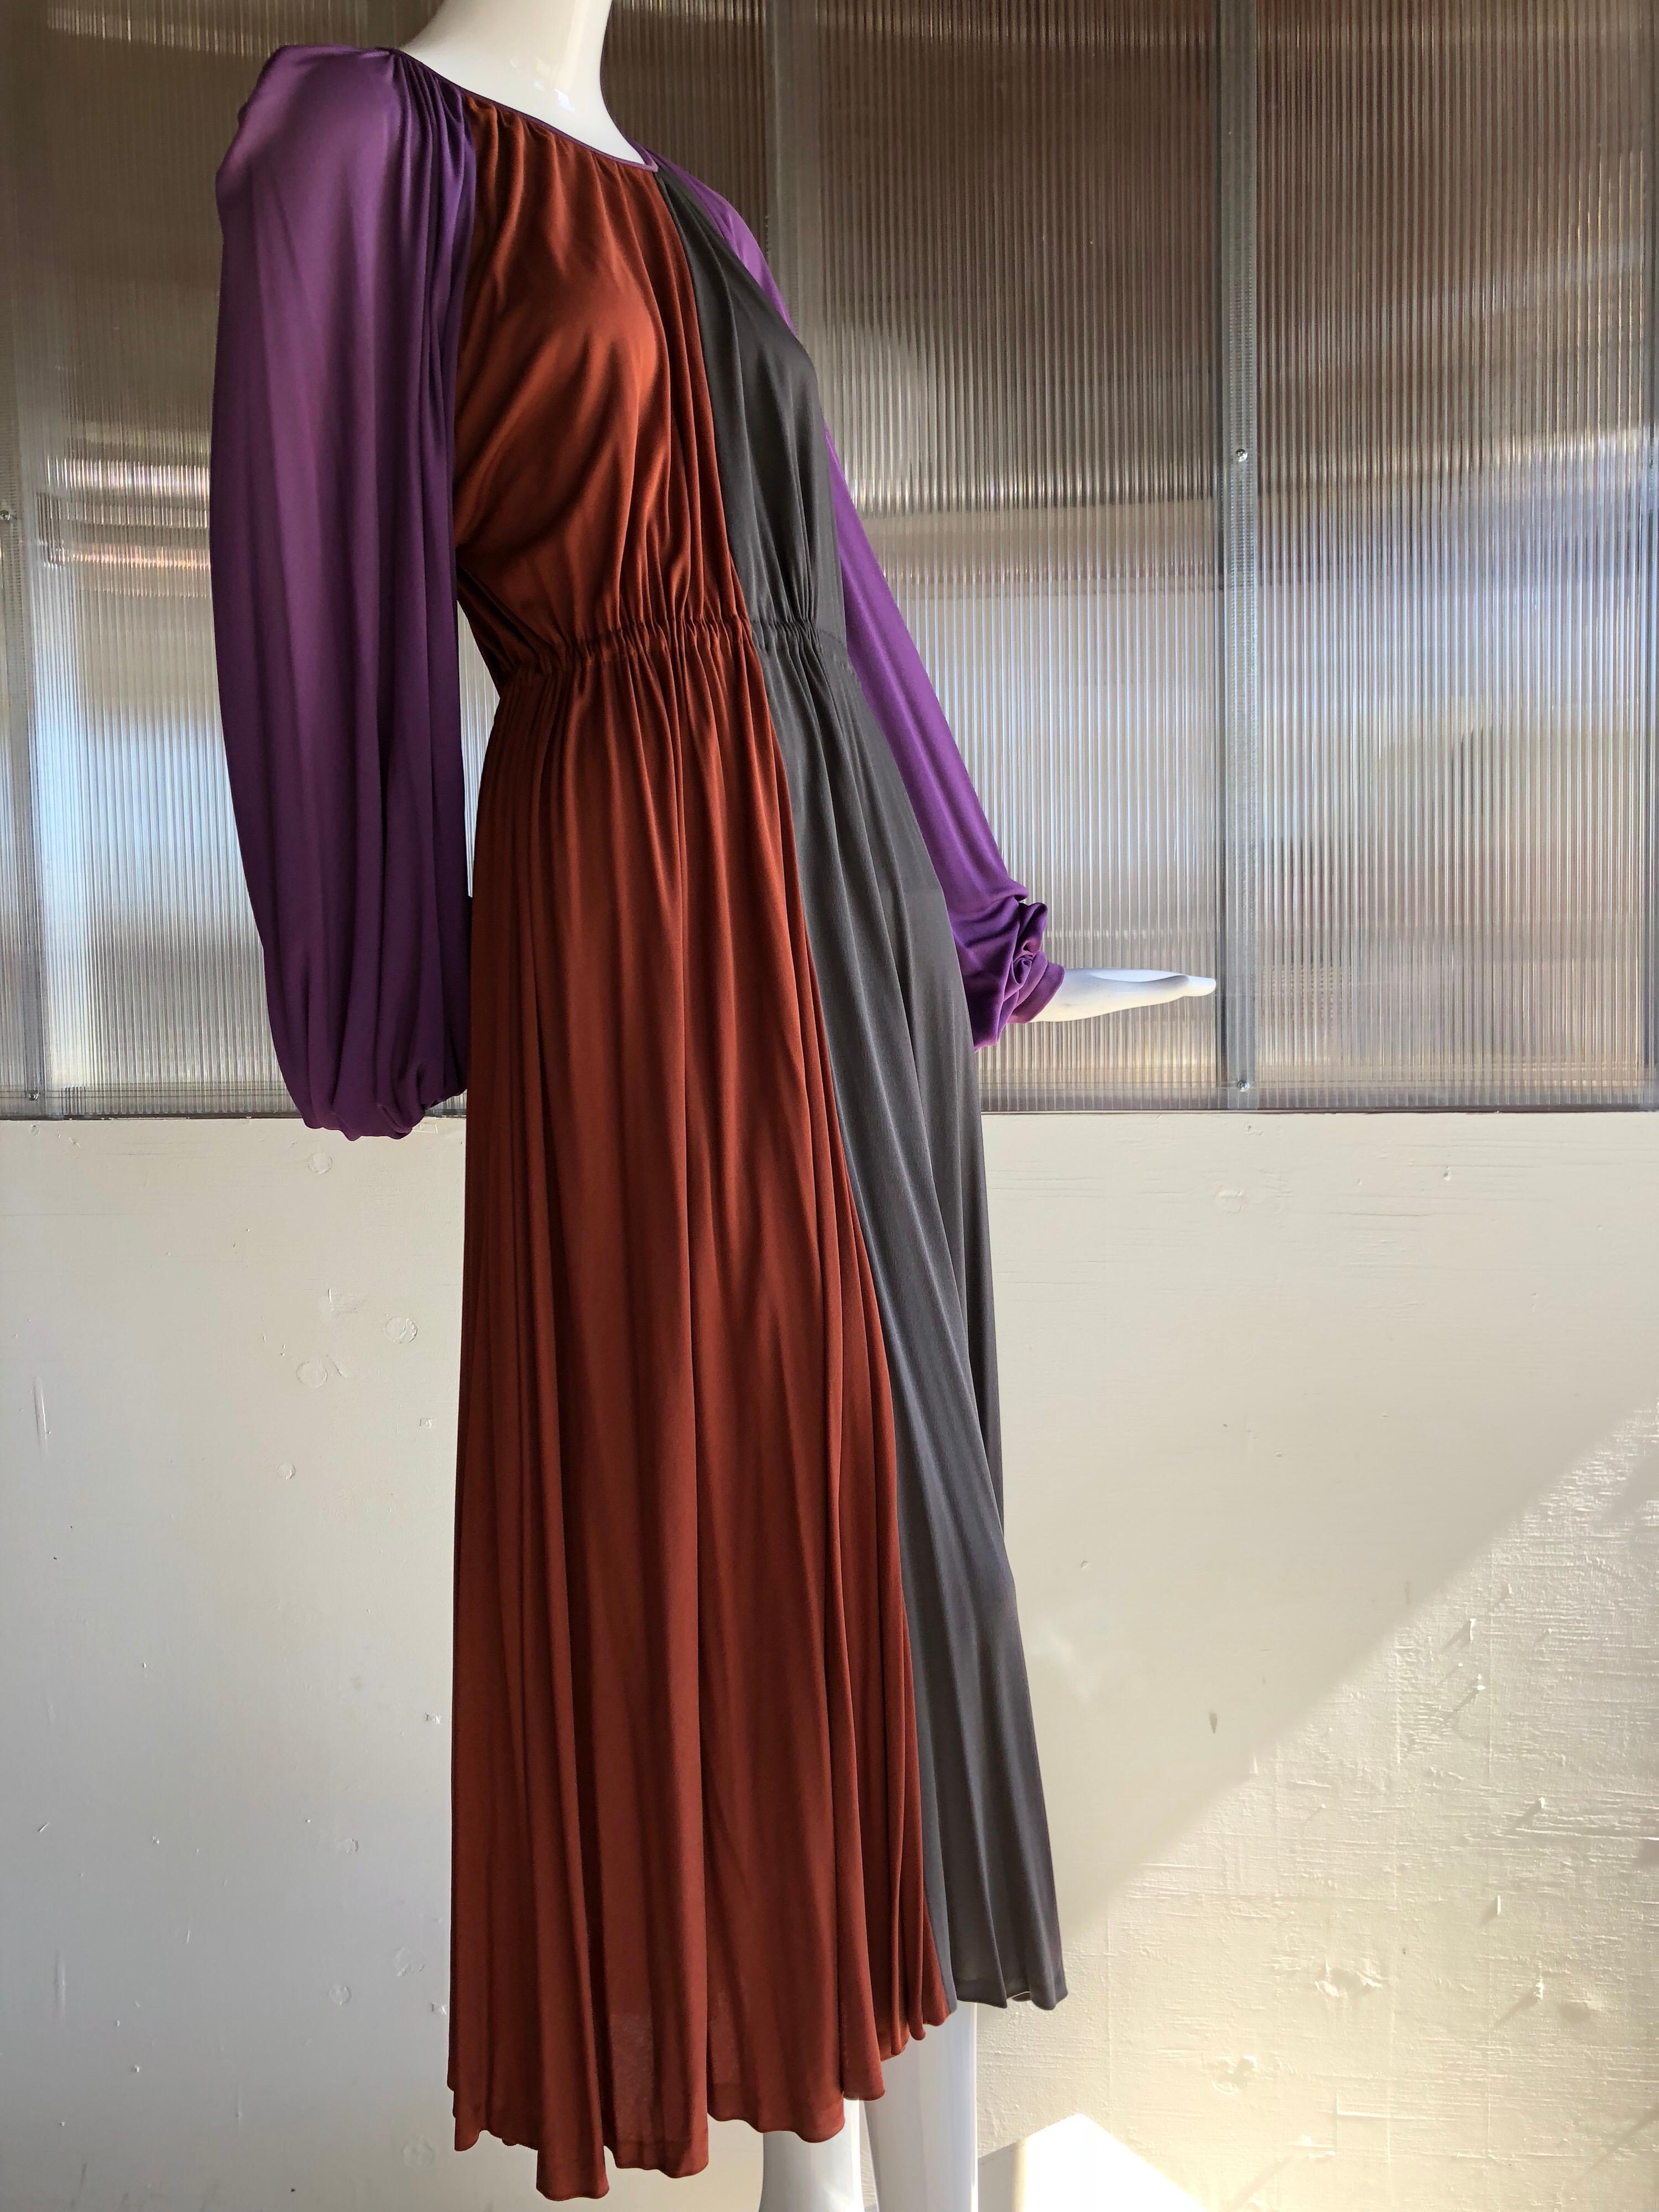 Galanos Silk Jersey Purple / Rust / Taupe Balloon Sleeve Custom Made Dress, 70s In Excellent Condition For Sale In Gresham, OR